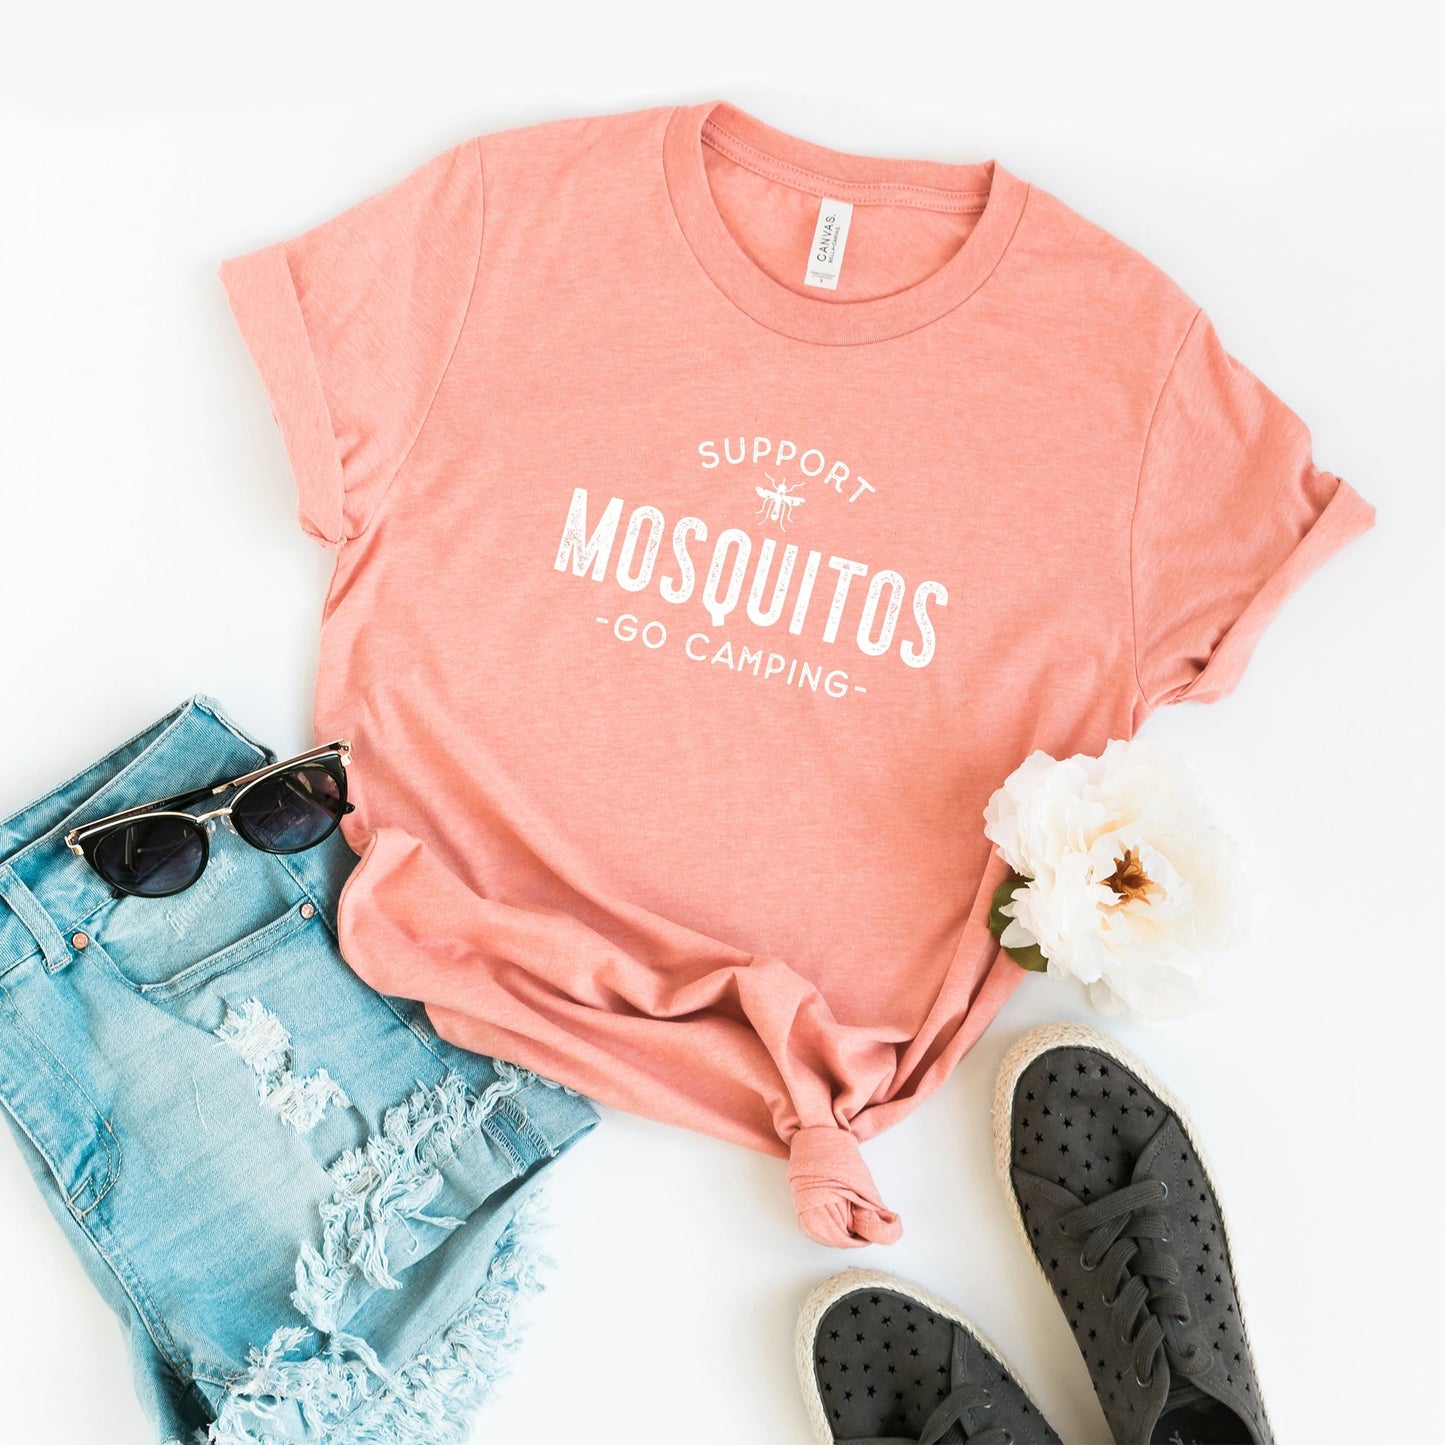 Support Mosquitos Go Camping | Short Sleeve Crew Neck